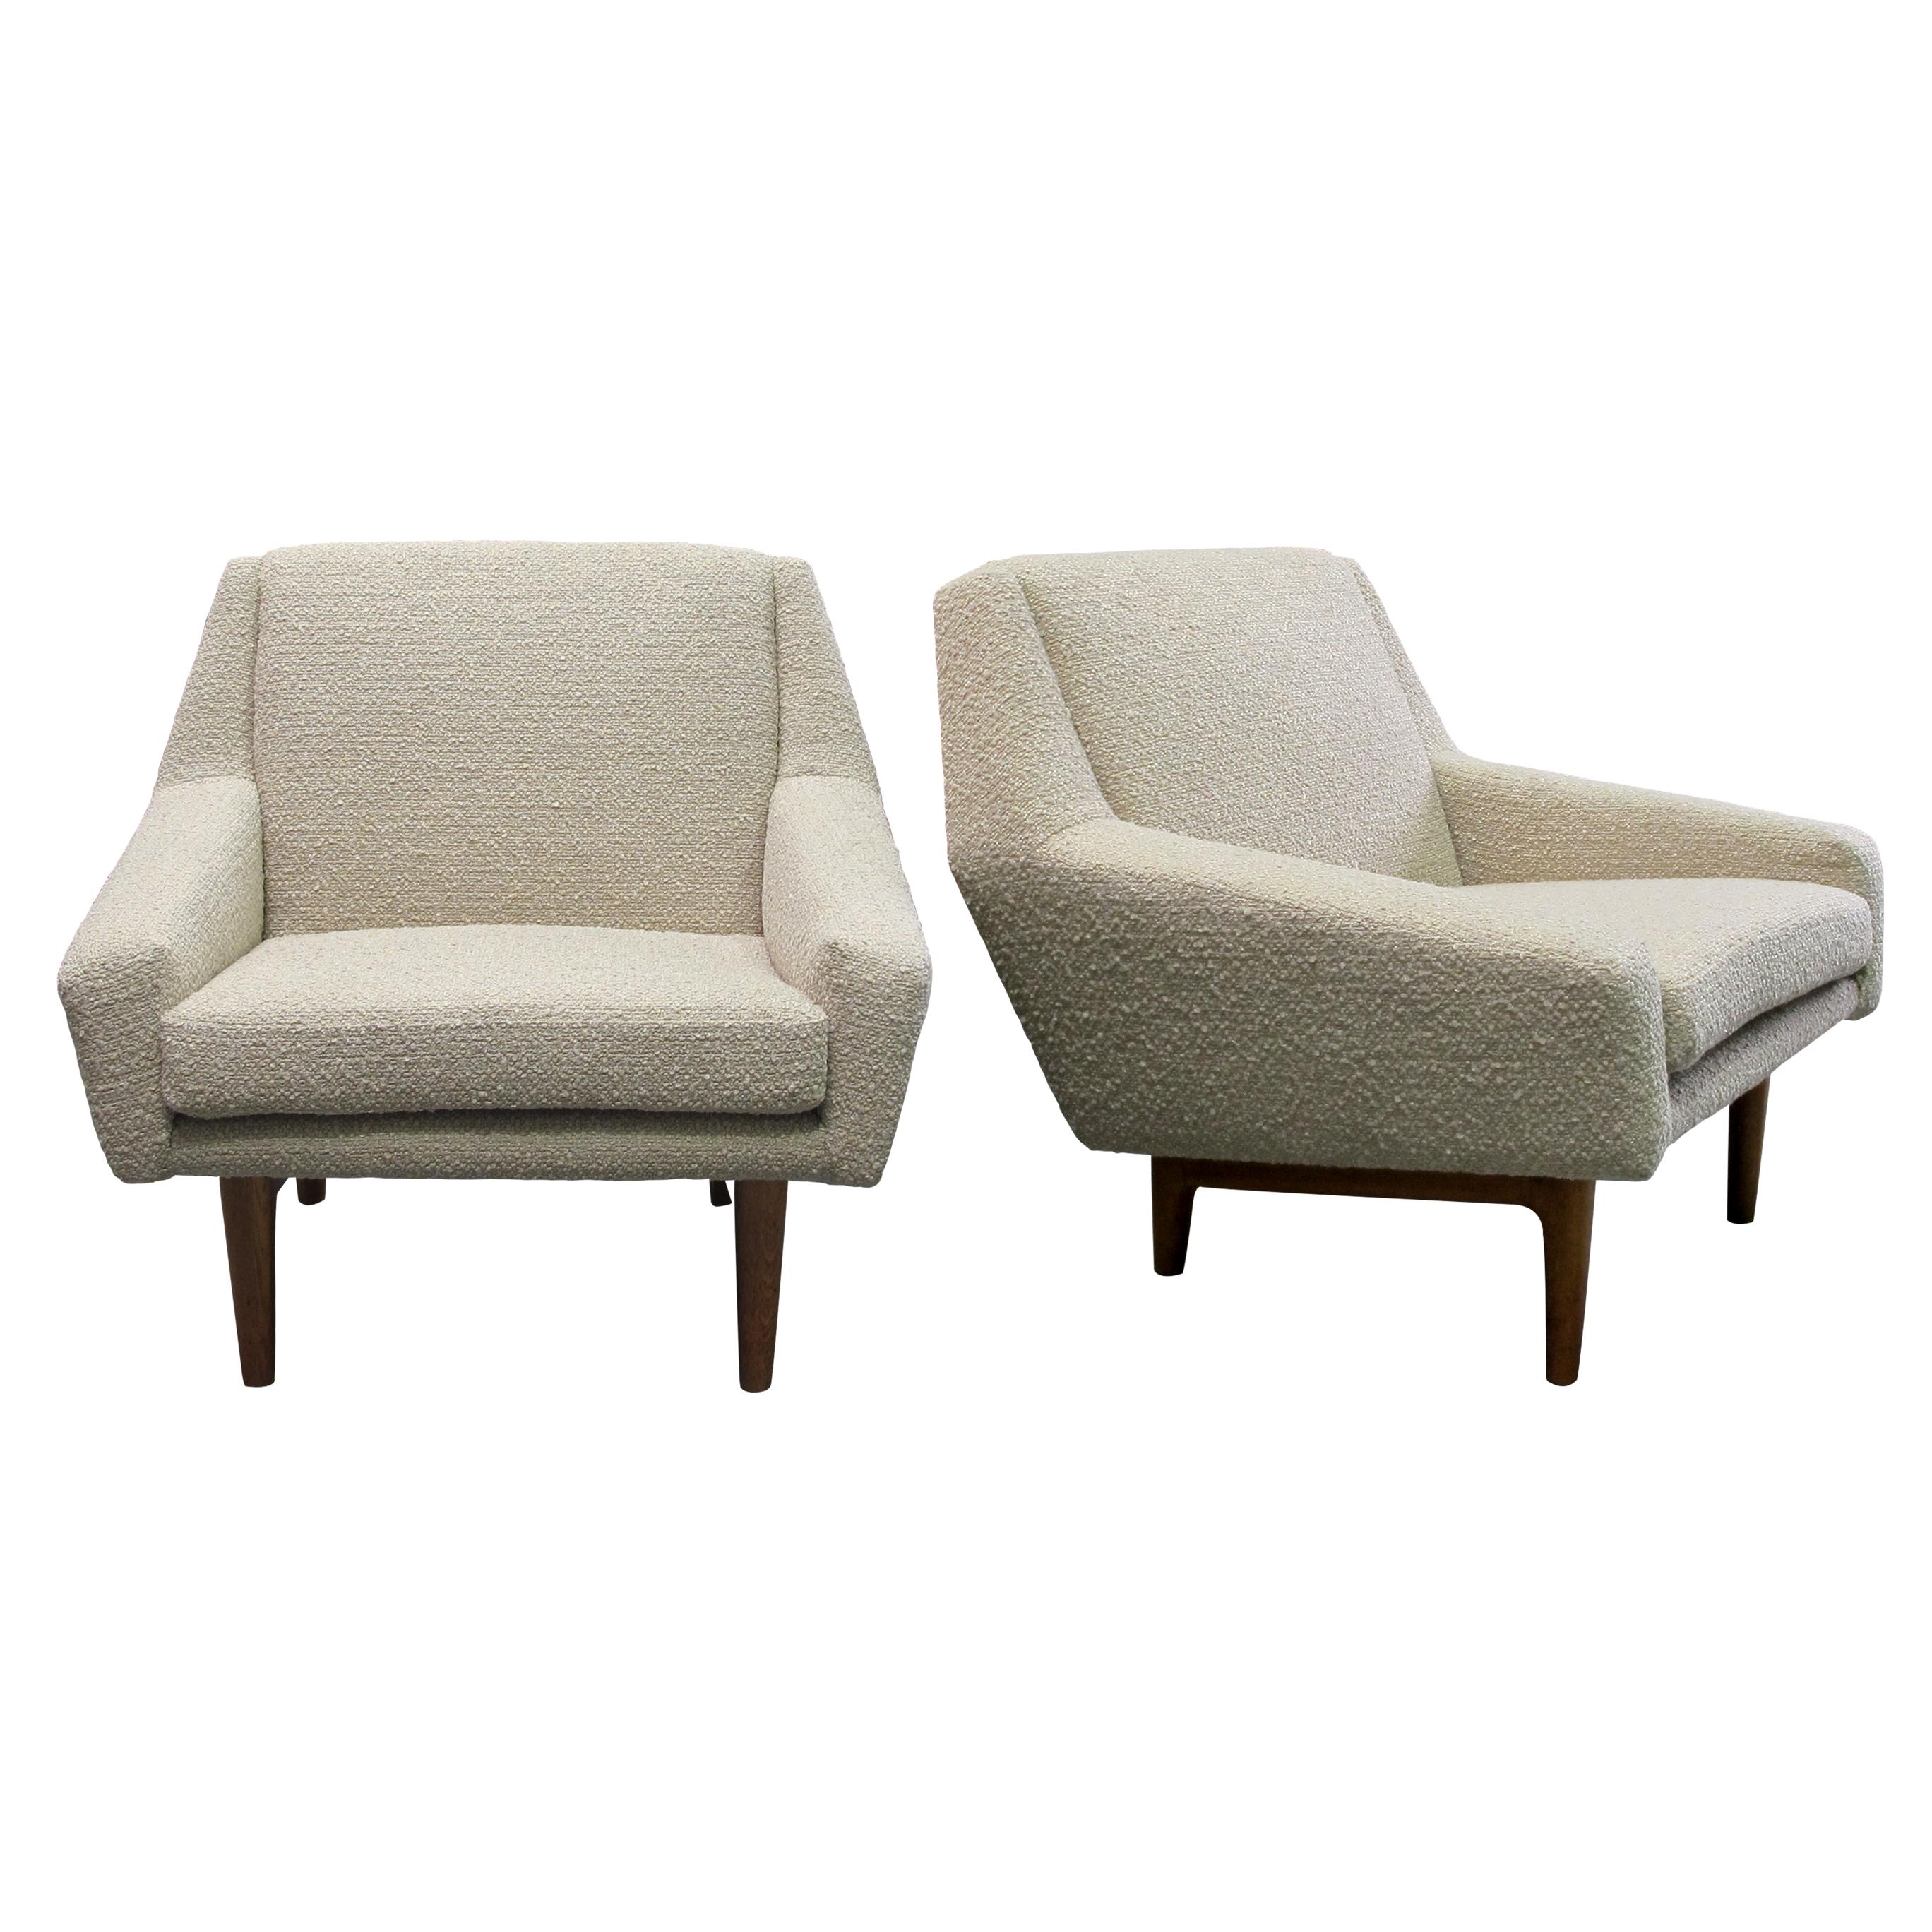 Fabric Mid-Century Structural pair of Armchairs Newly Upholstered, Swedish 